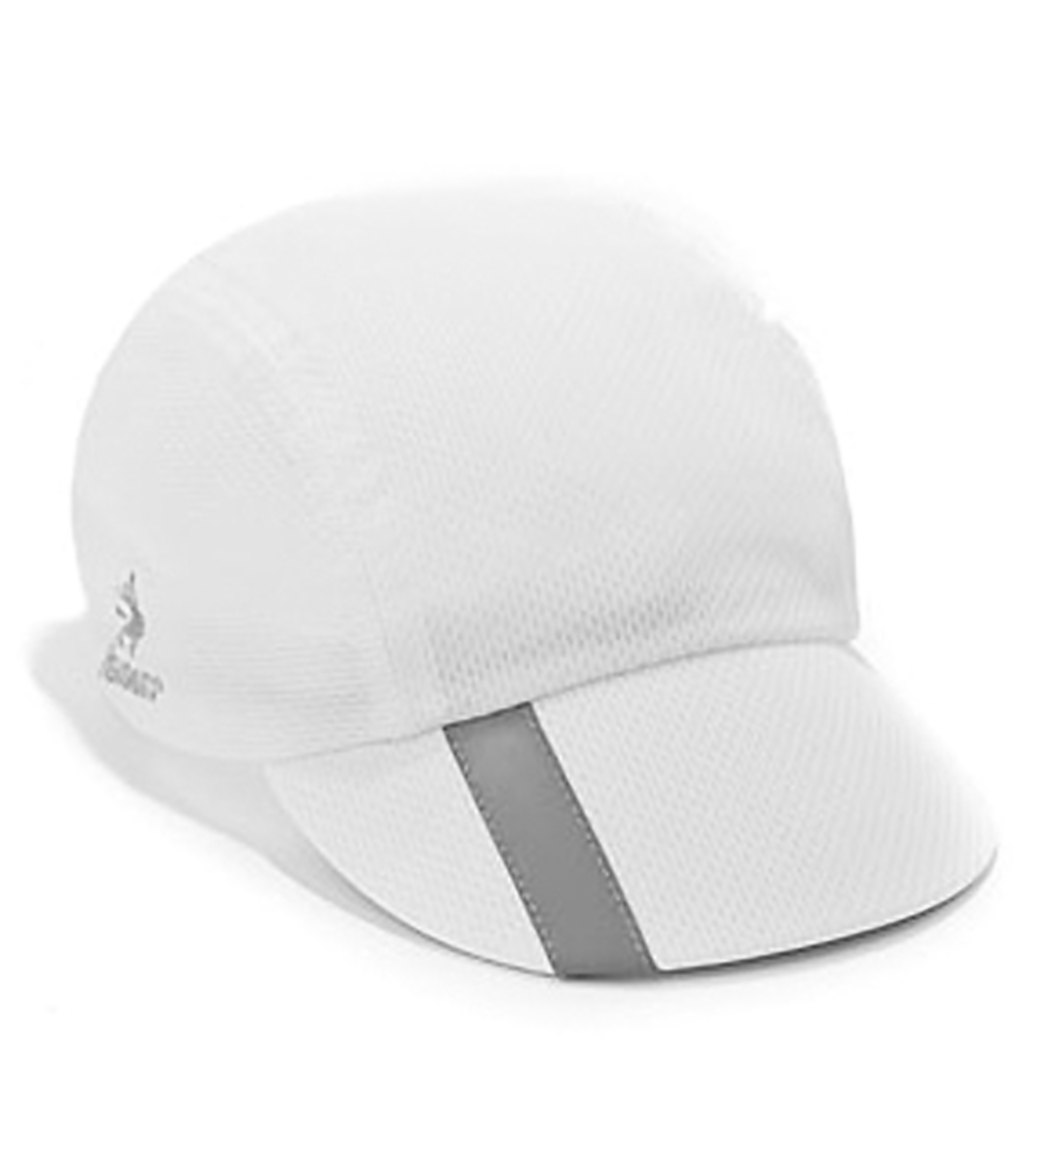 Headsweats Spincycle - White Polyester - Swimoutlet.com